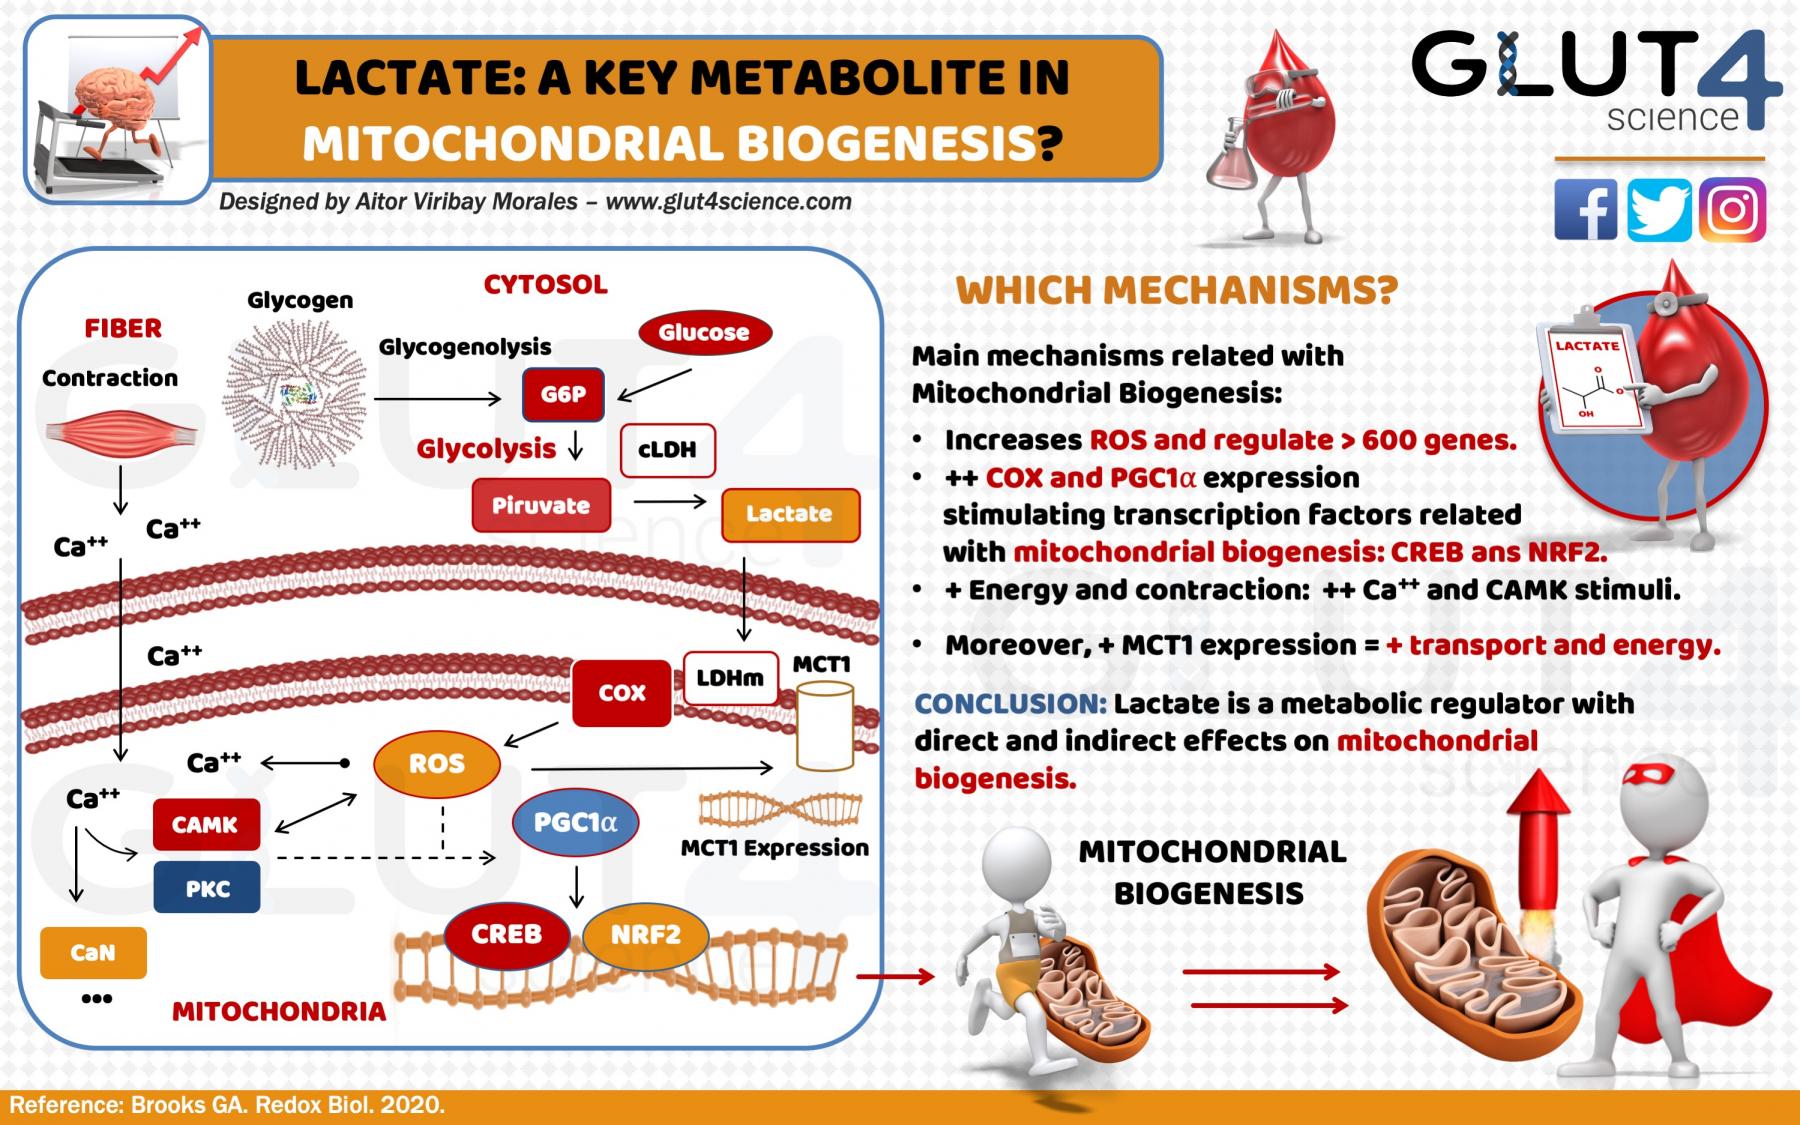 Lactate and Mitochondrial Biogenesis: A key metabolite?